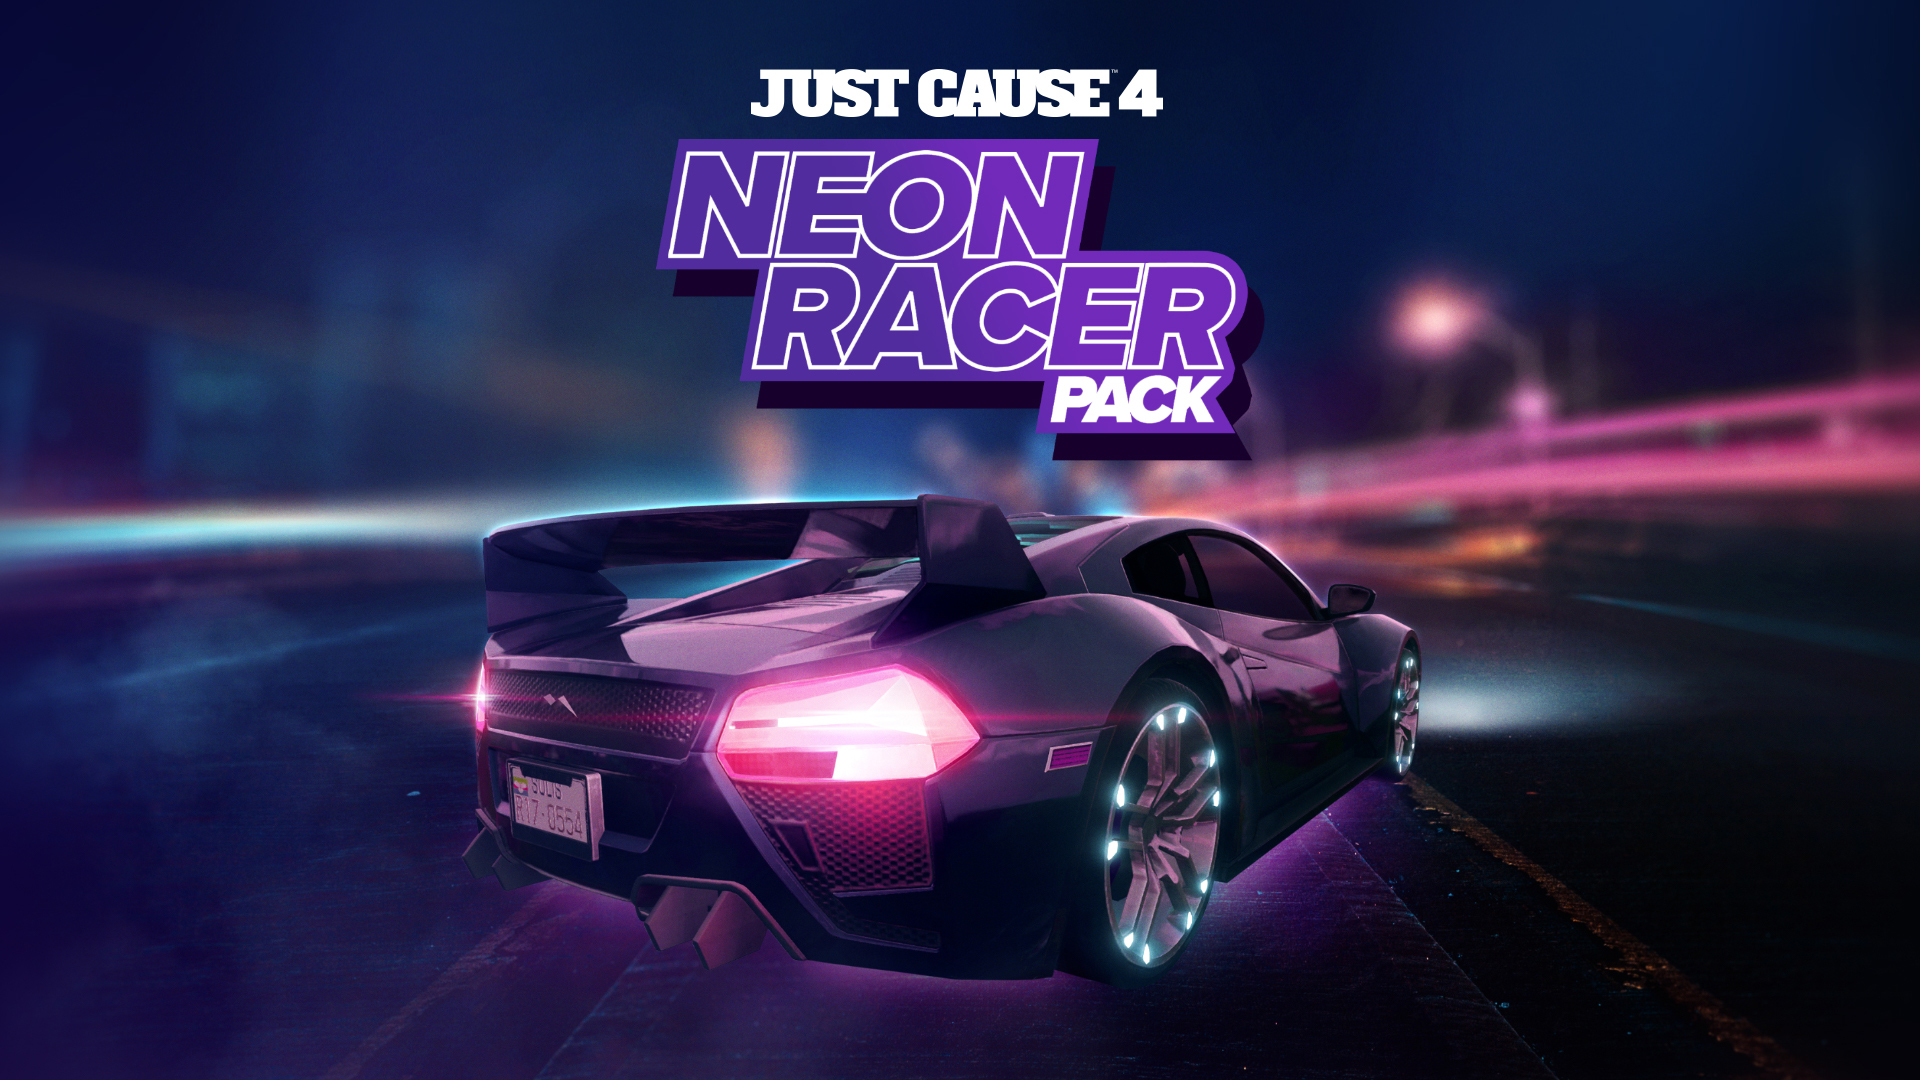 Just Cause™ 4: Neon Racer Pack Featured Screenshot #1